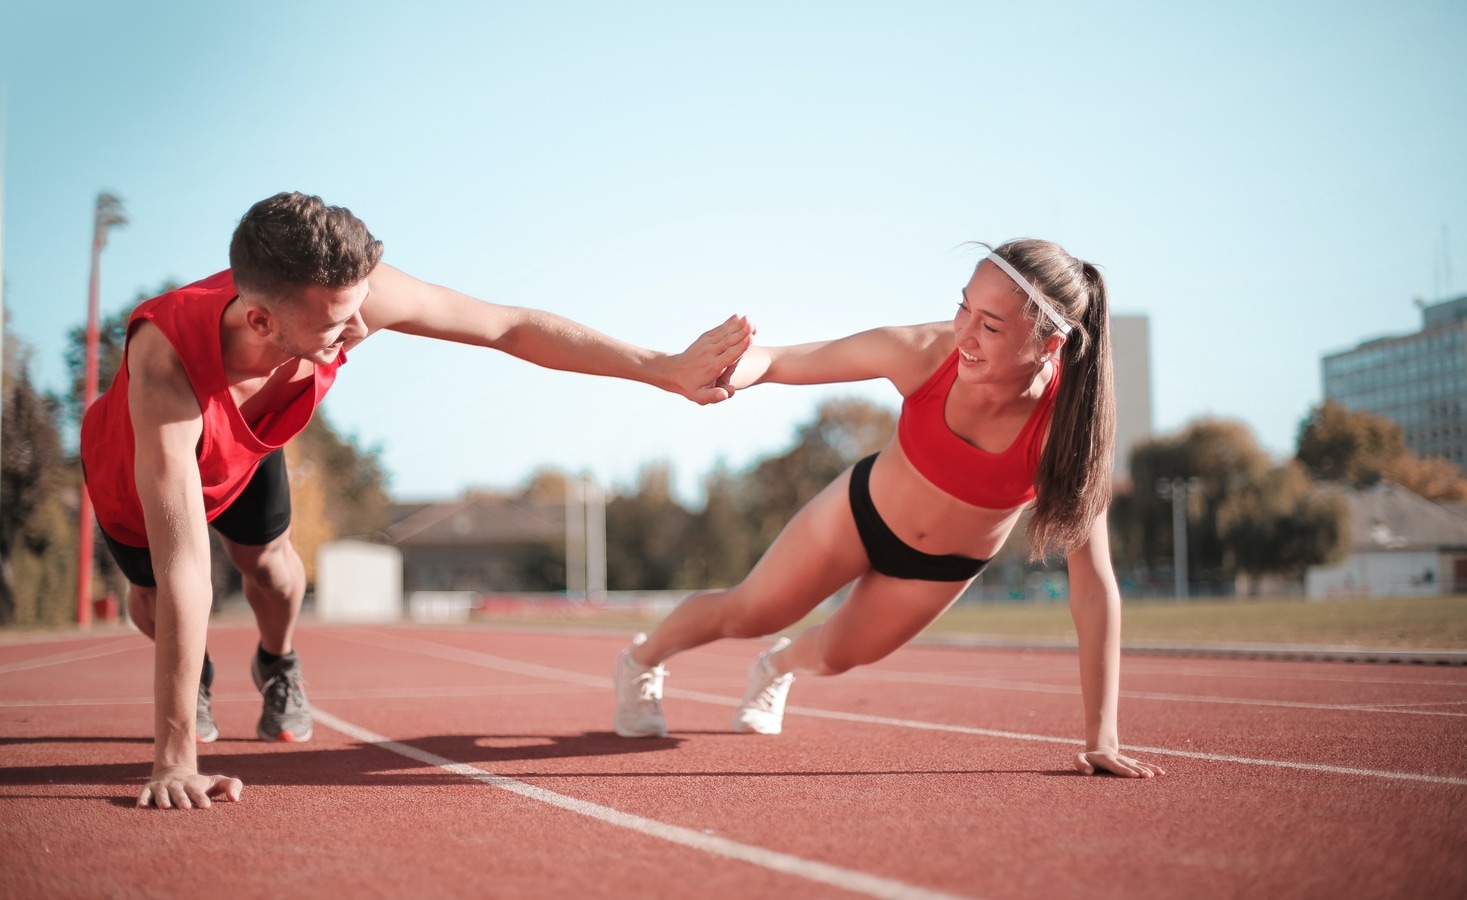 Medically approved health tips to improve an athlete’s physical fitness | Health